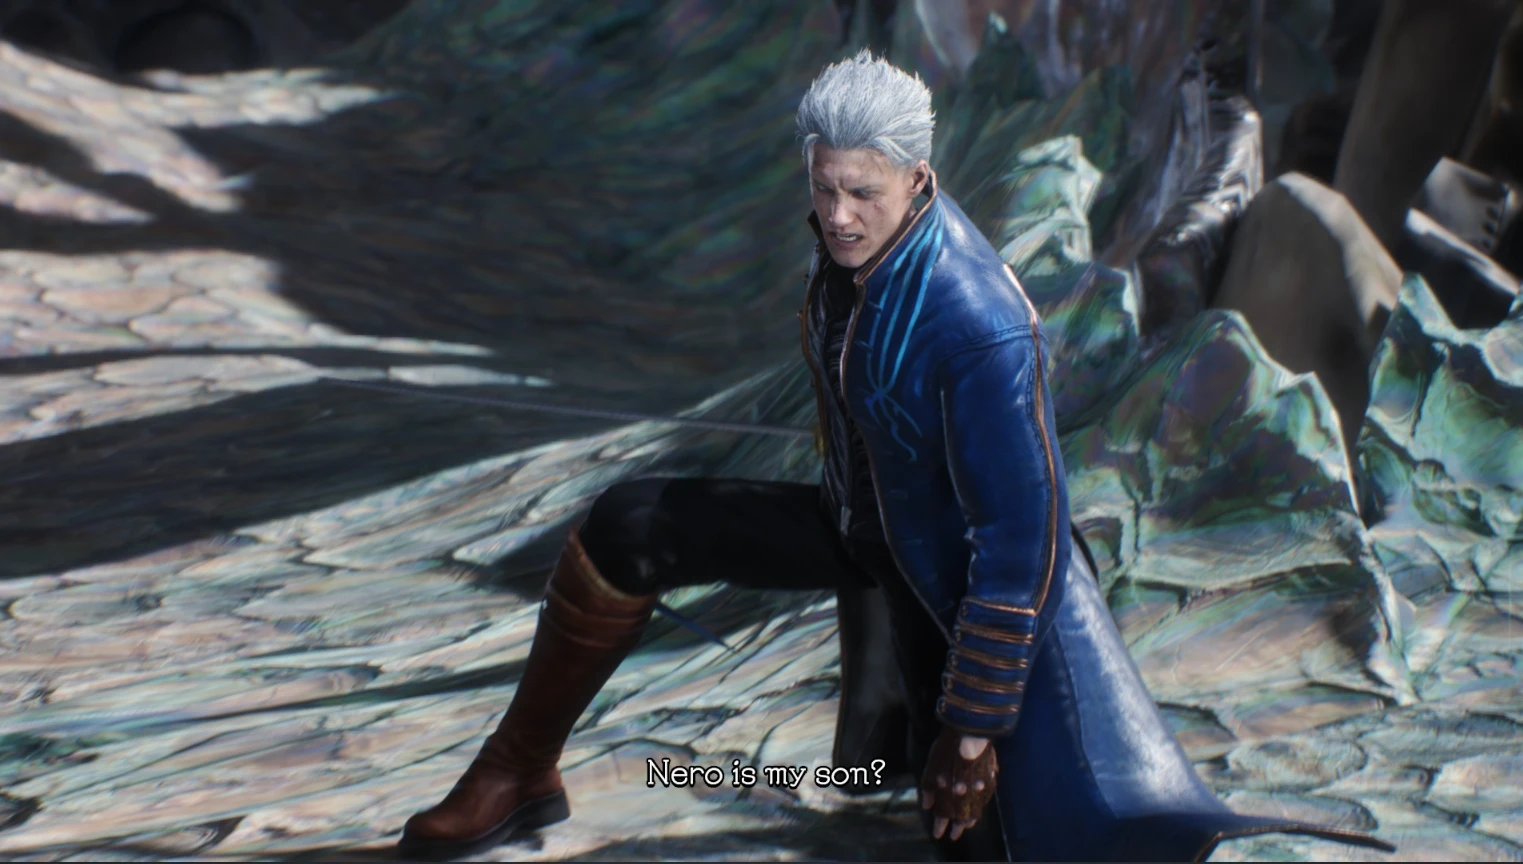 Dmc Poc Vergil Outfit At Devil May Cry Nexus Mods And Community